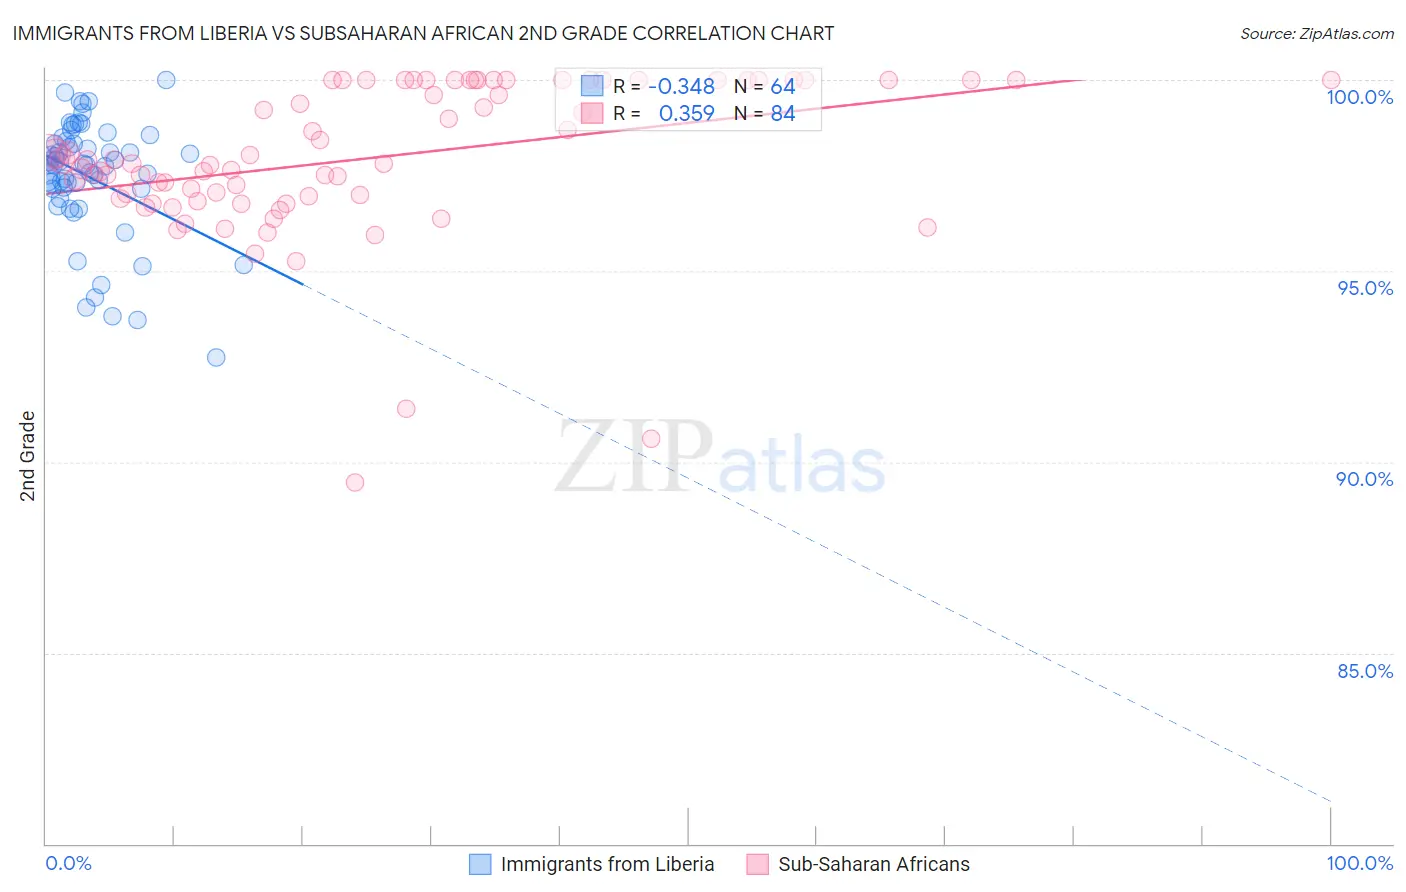 Immigrants from Liberia vs Subsaharan African 2nd Grade